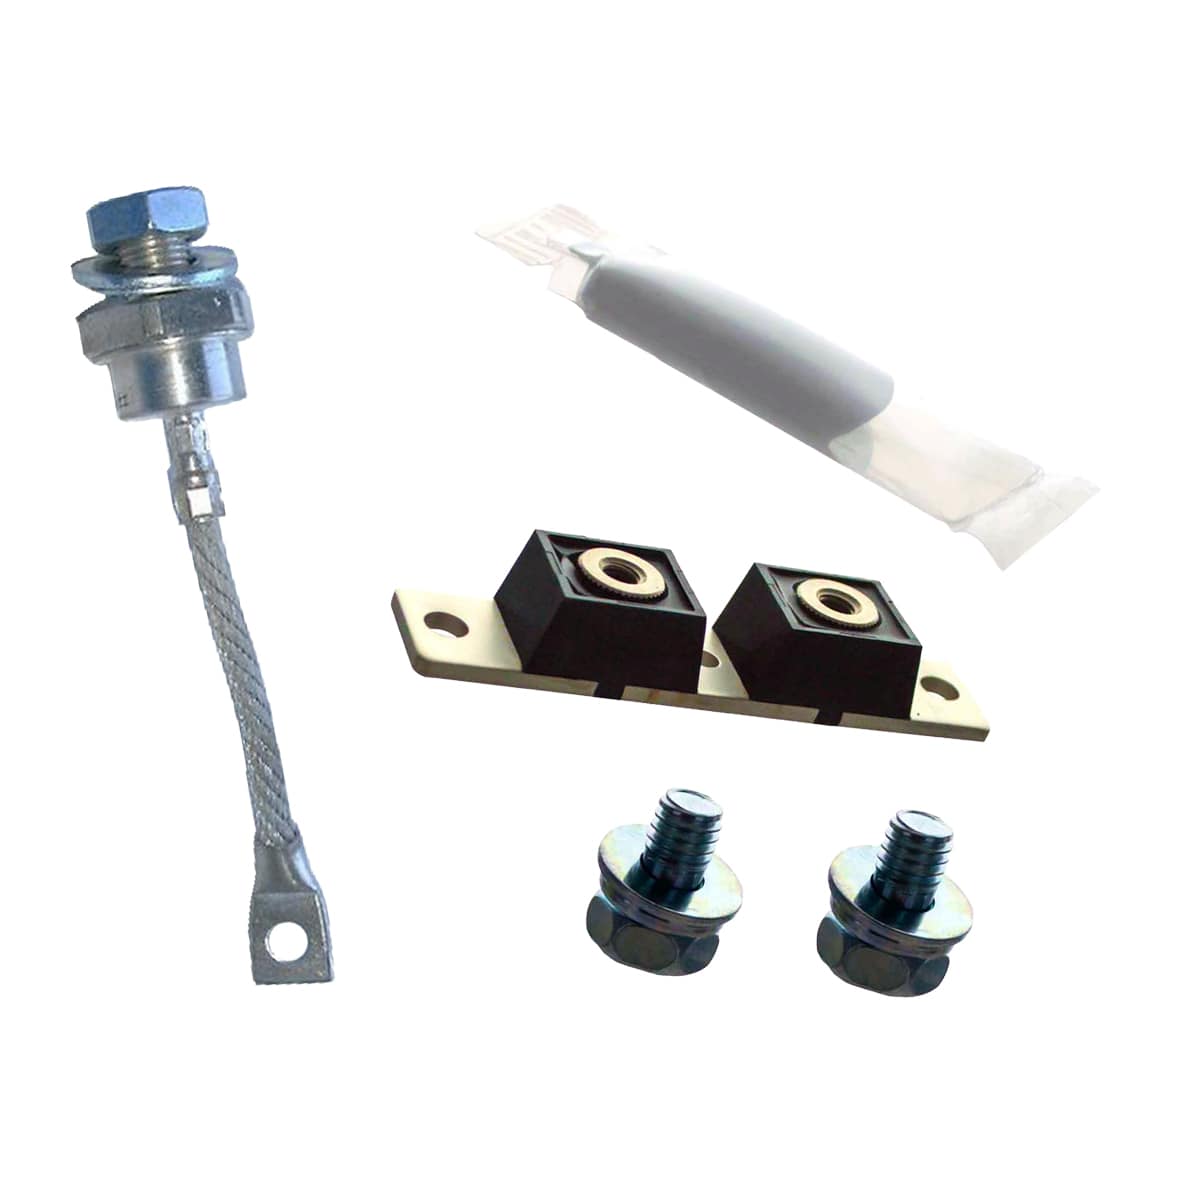 KIT DIODE FAST RECOVERY BRIDGE. Part: 201530